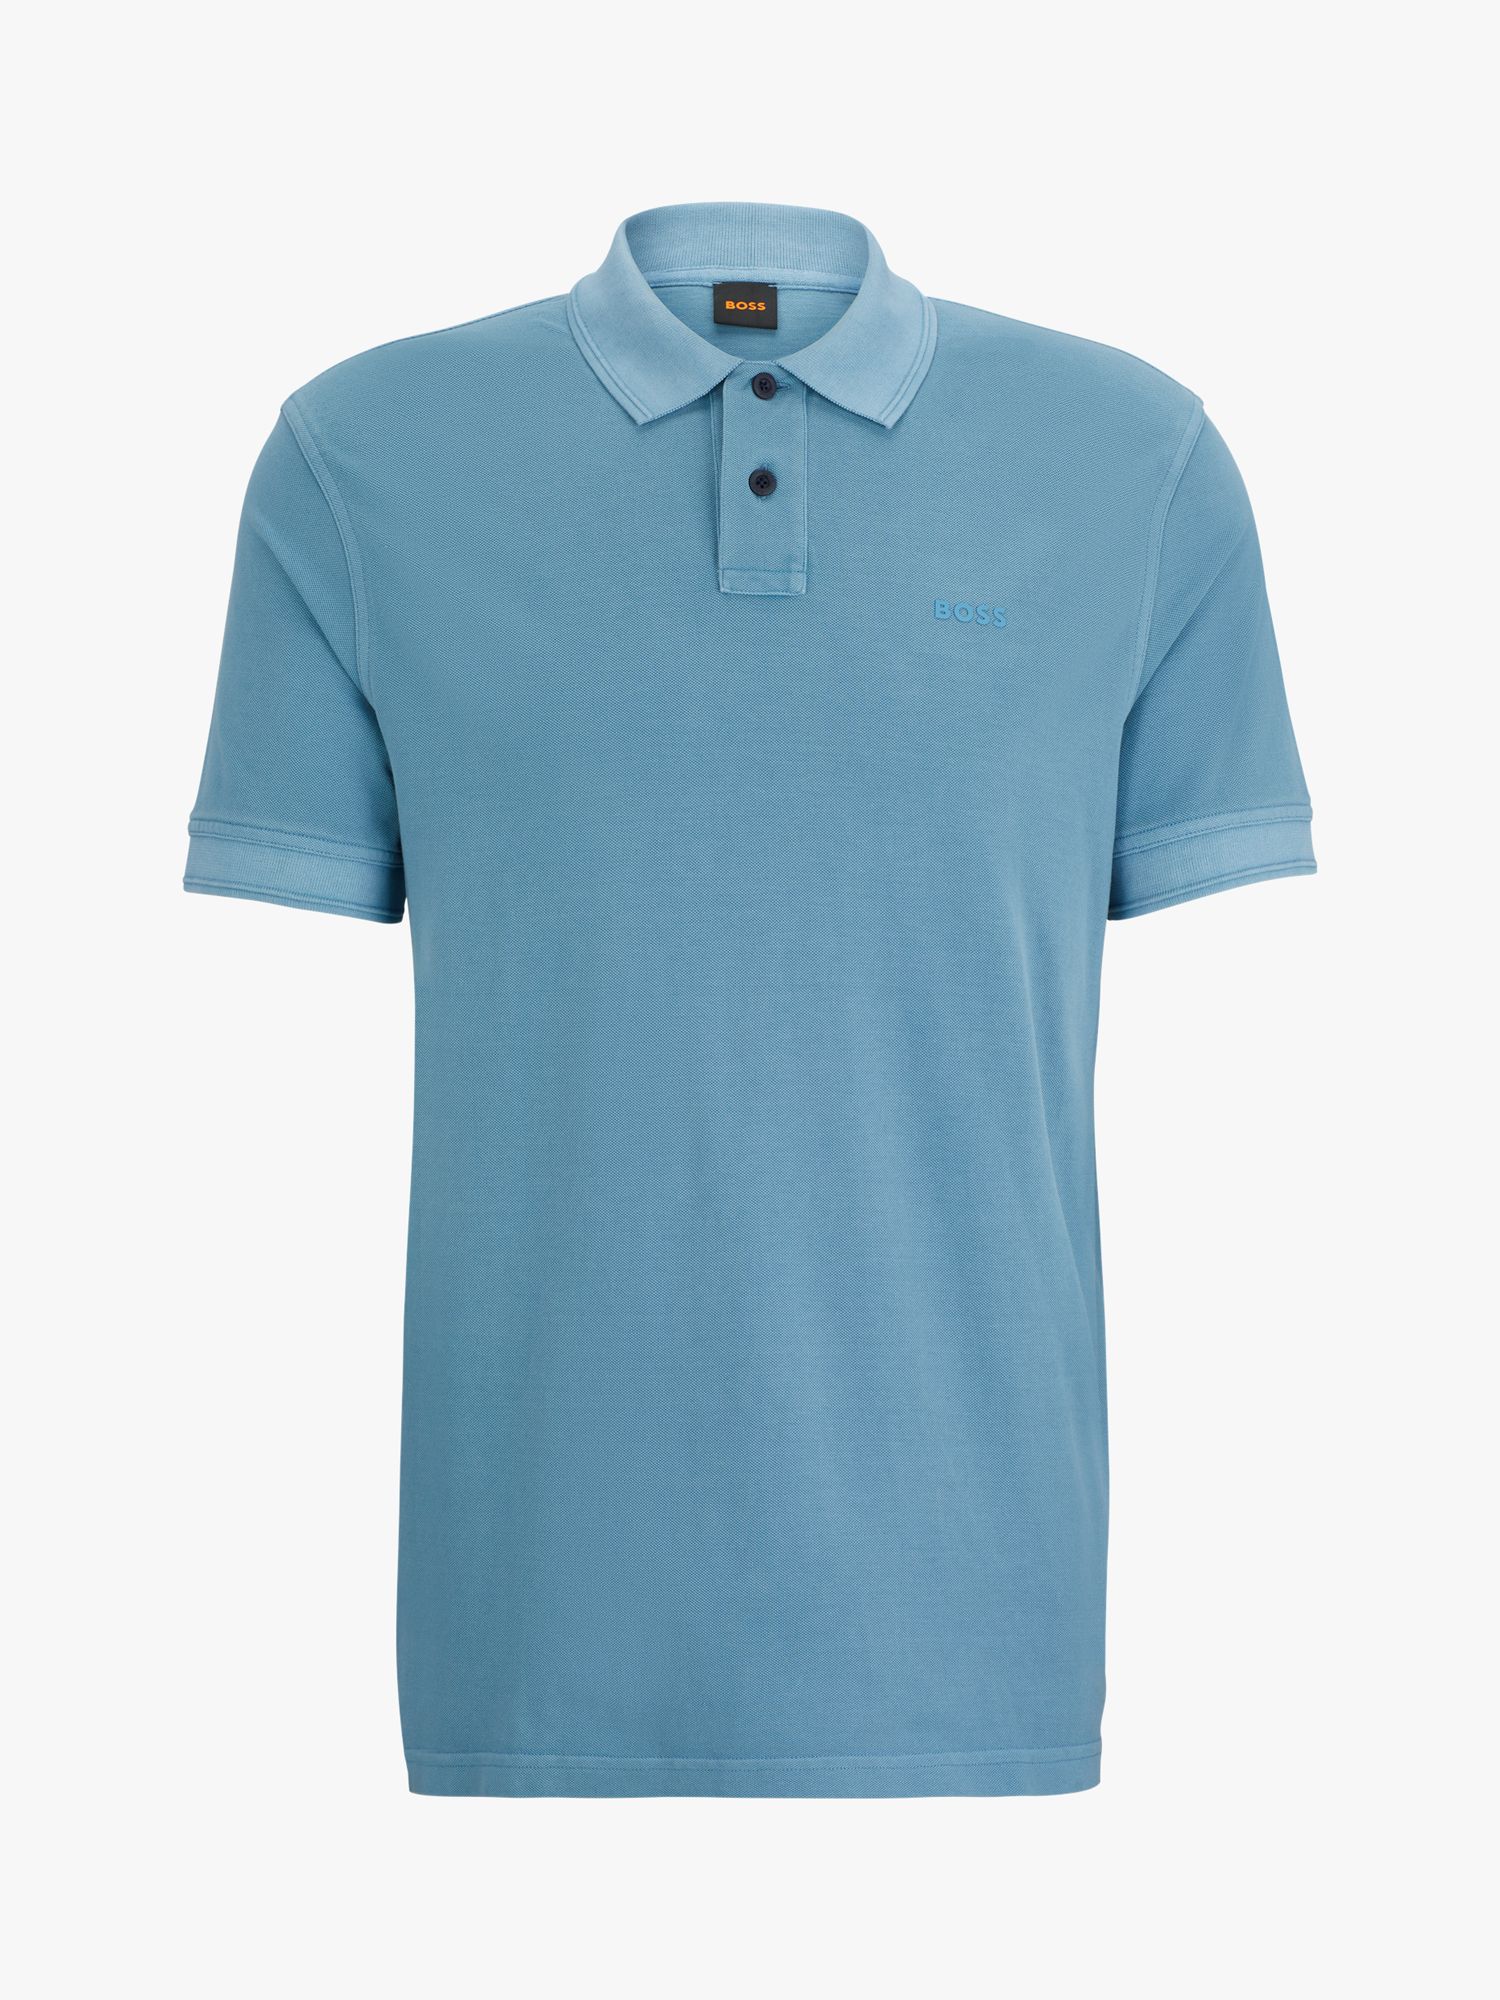 Buy BOSS Prime Cotton Polo Top Online at johnlewis.com